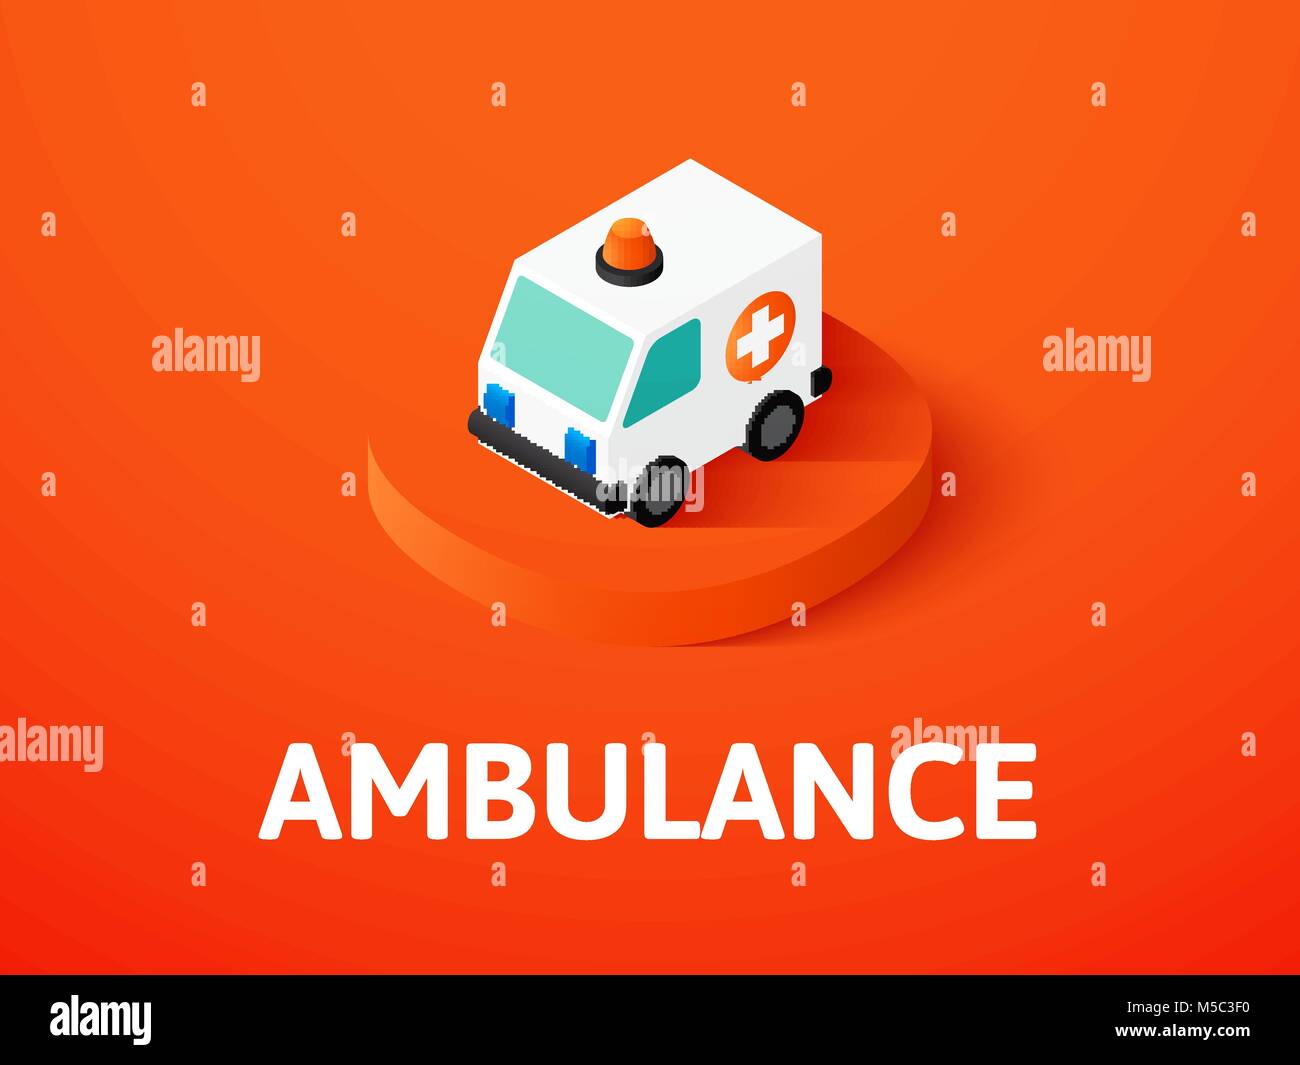 Ambulance isometric icon, isolated on color background Stock Vector